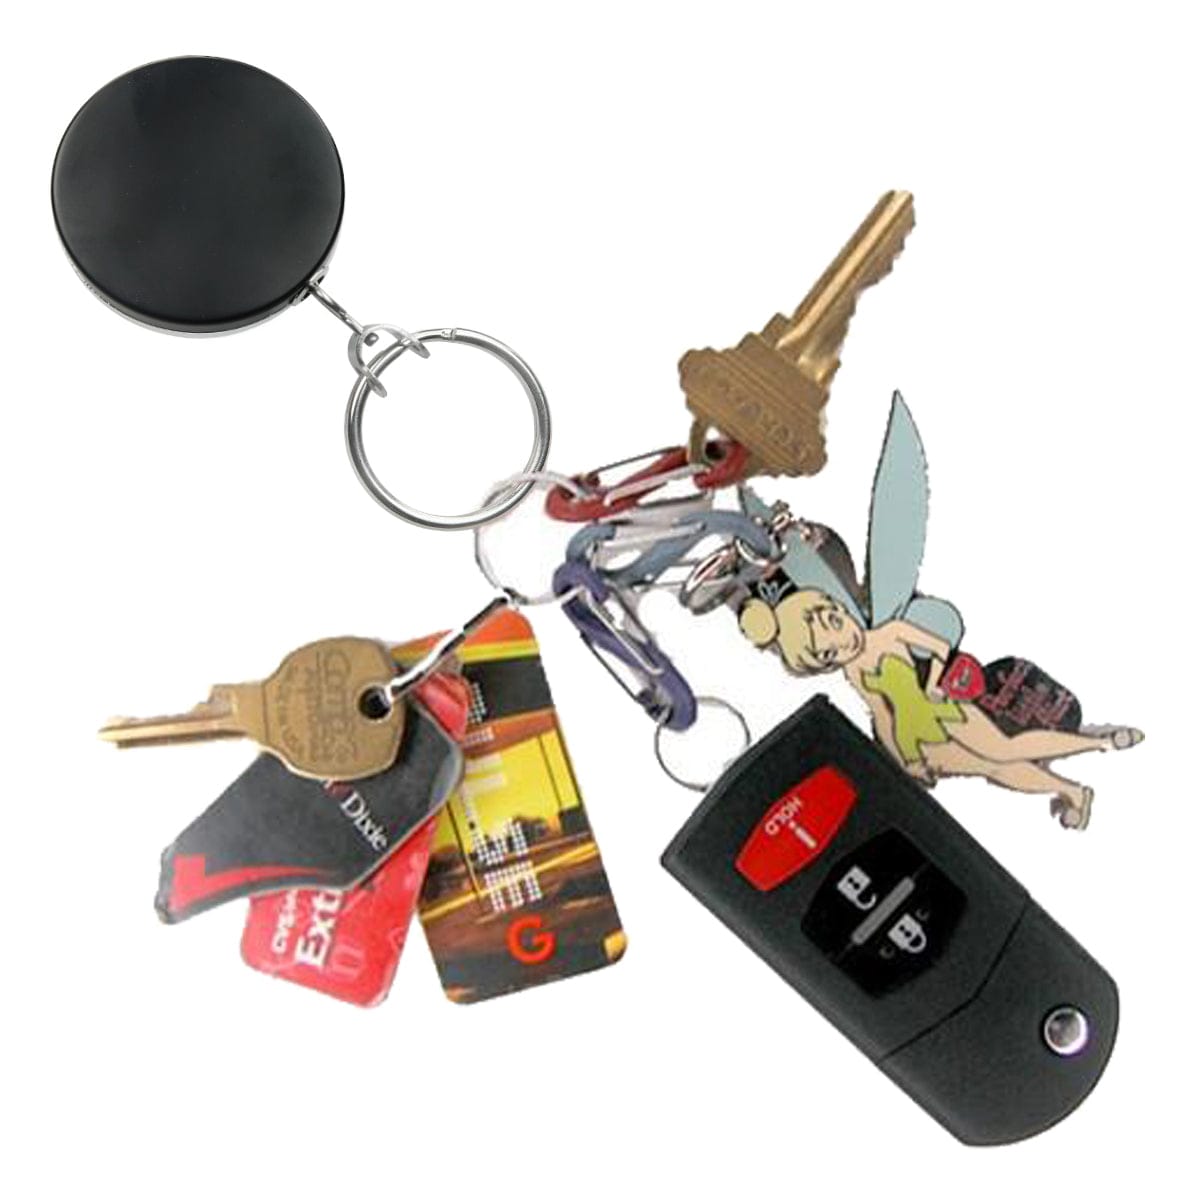 A Heavy Duty Badge Reel with Chain & Belt Clip - Strong All Metal Retractable Keychain for Keys and Badges (2120-3325) includes various keys, a keycard, a car remote, and a small decorative charm of a fairy.